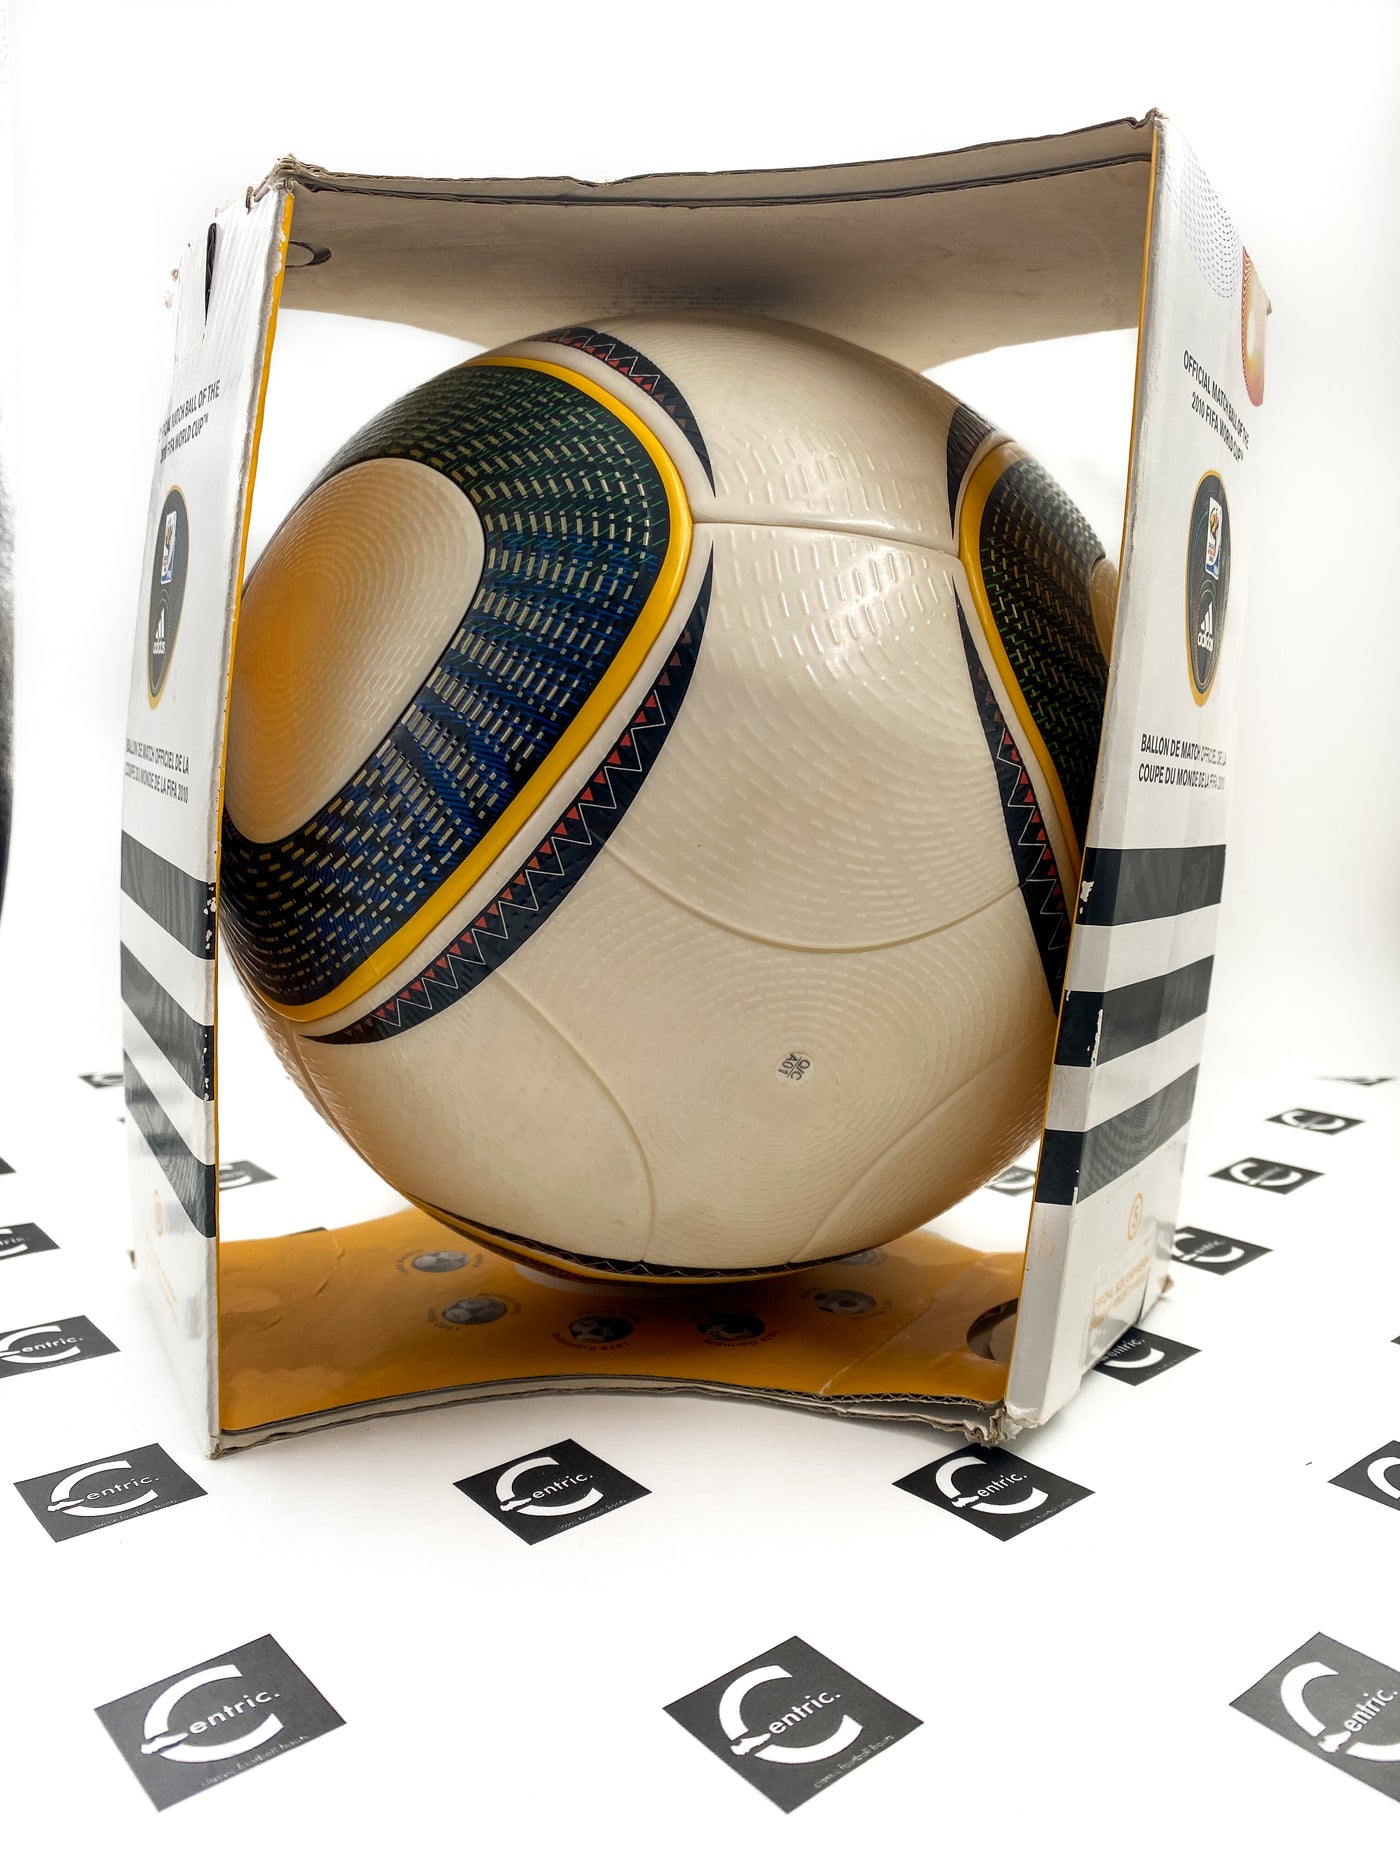 Adidas Jabulani Official Match Ball 2010 Fifa World Cup Brand New In Packaging - Bootscentric